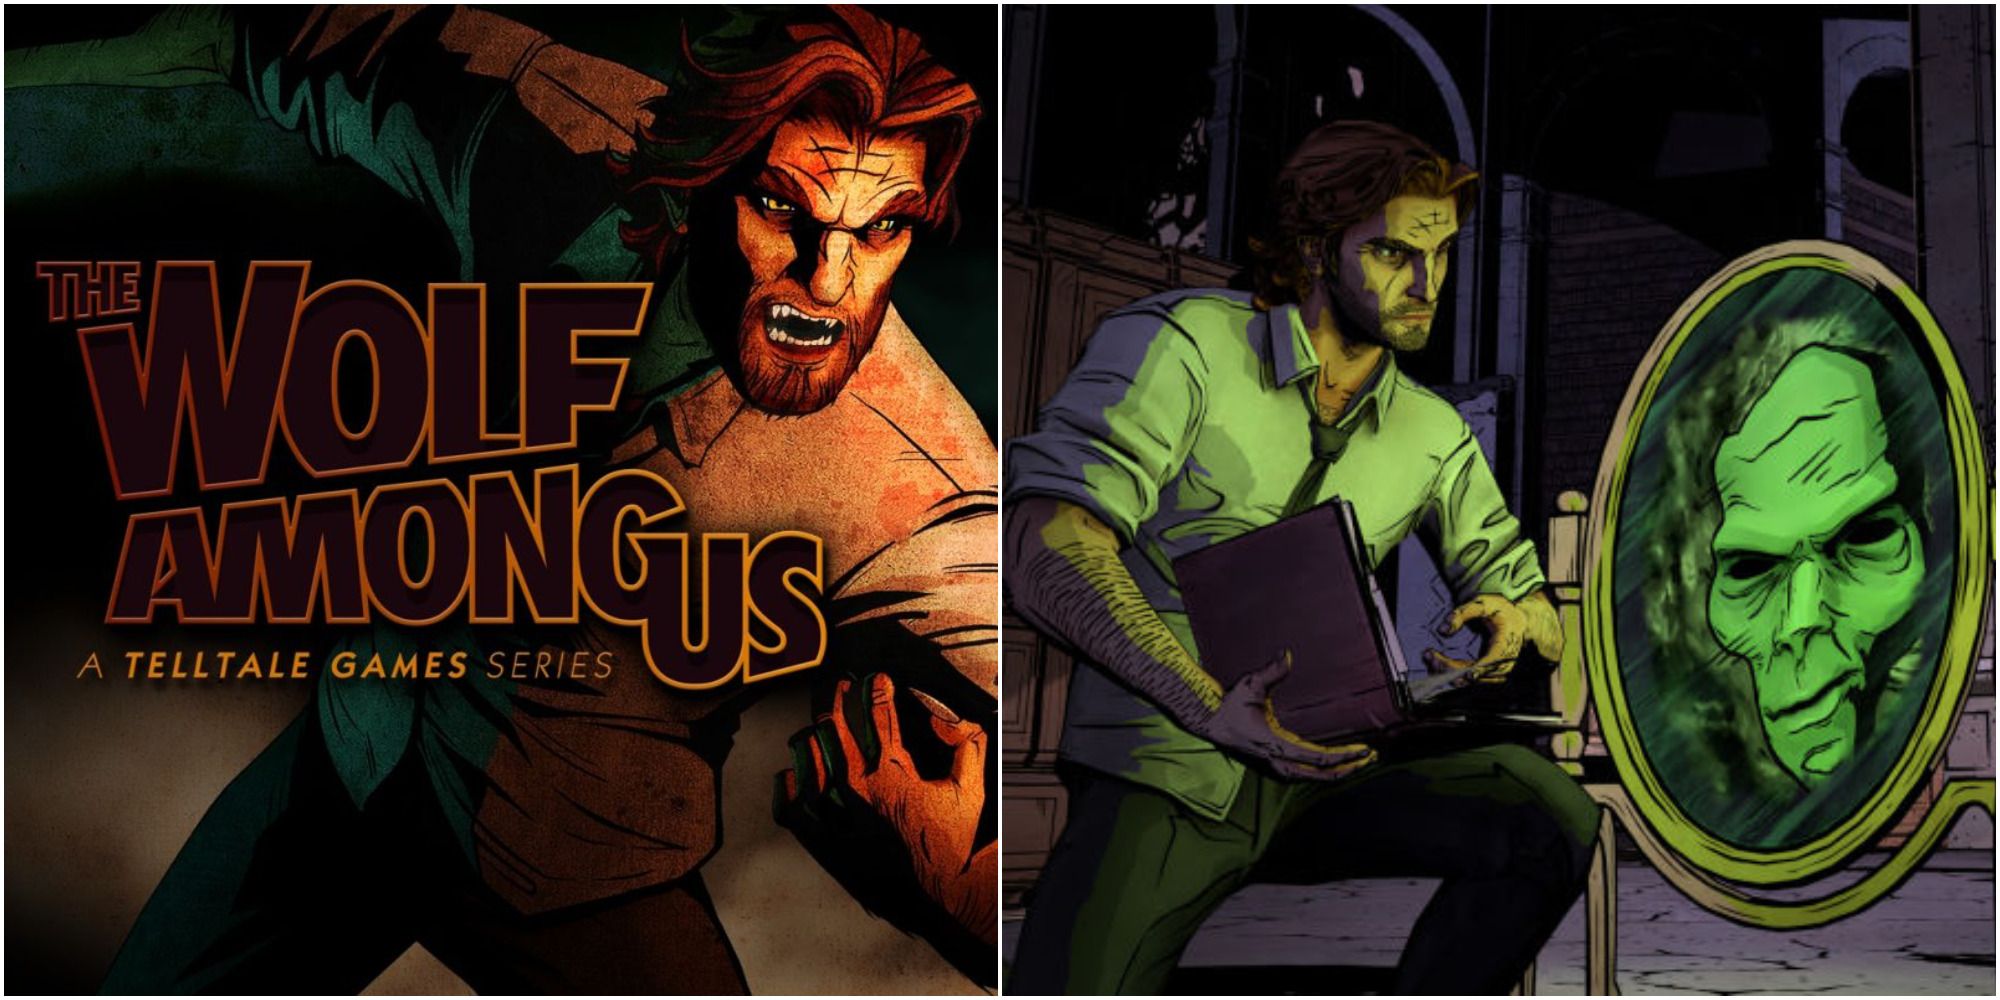 the wolf among us cover & gameplay